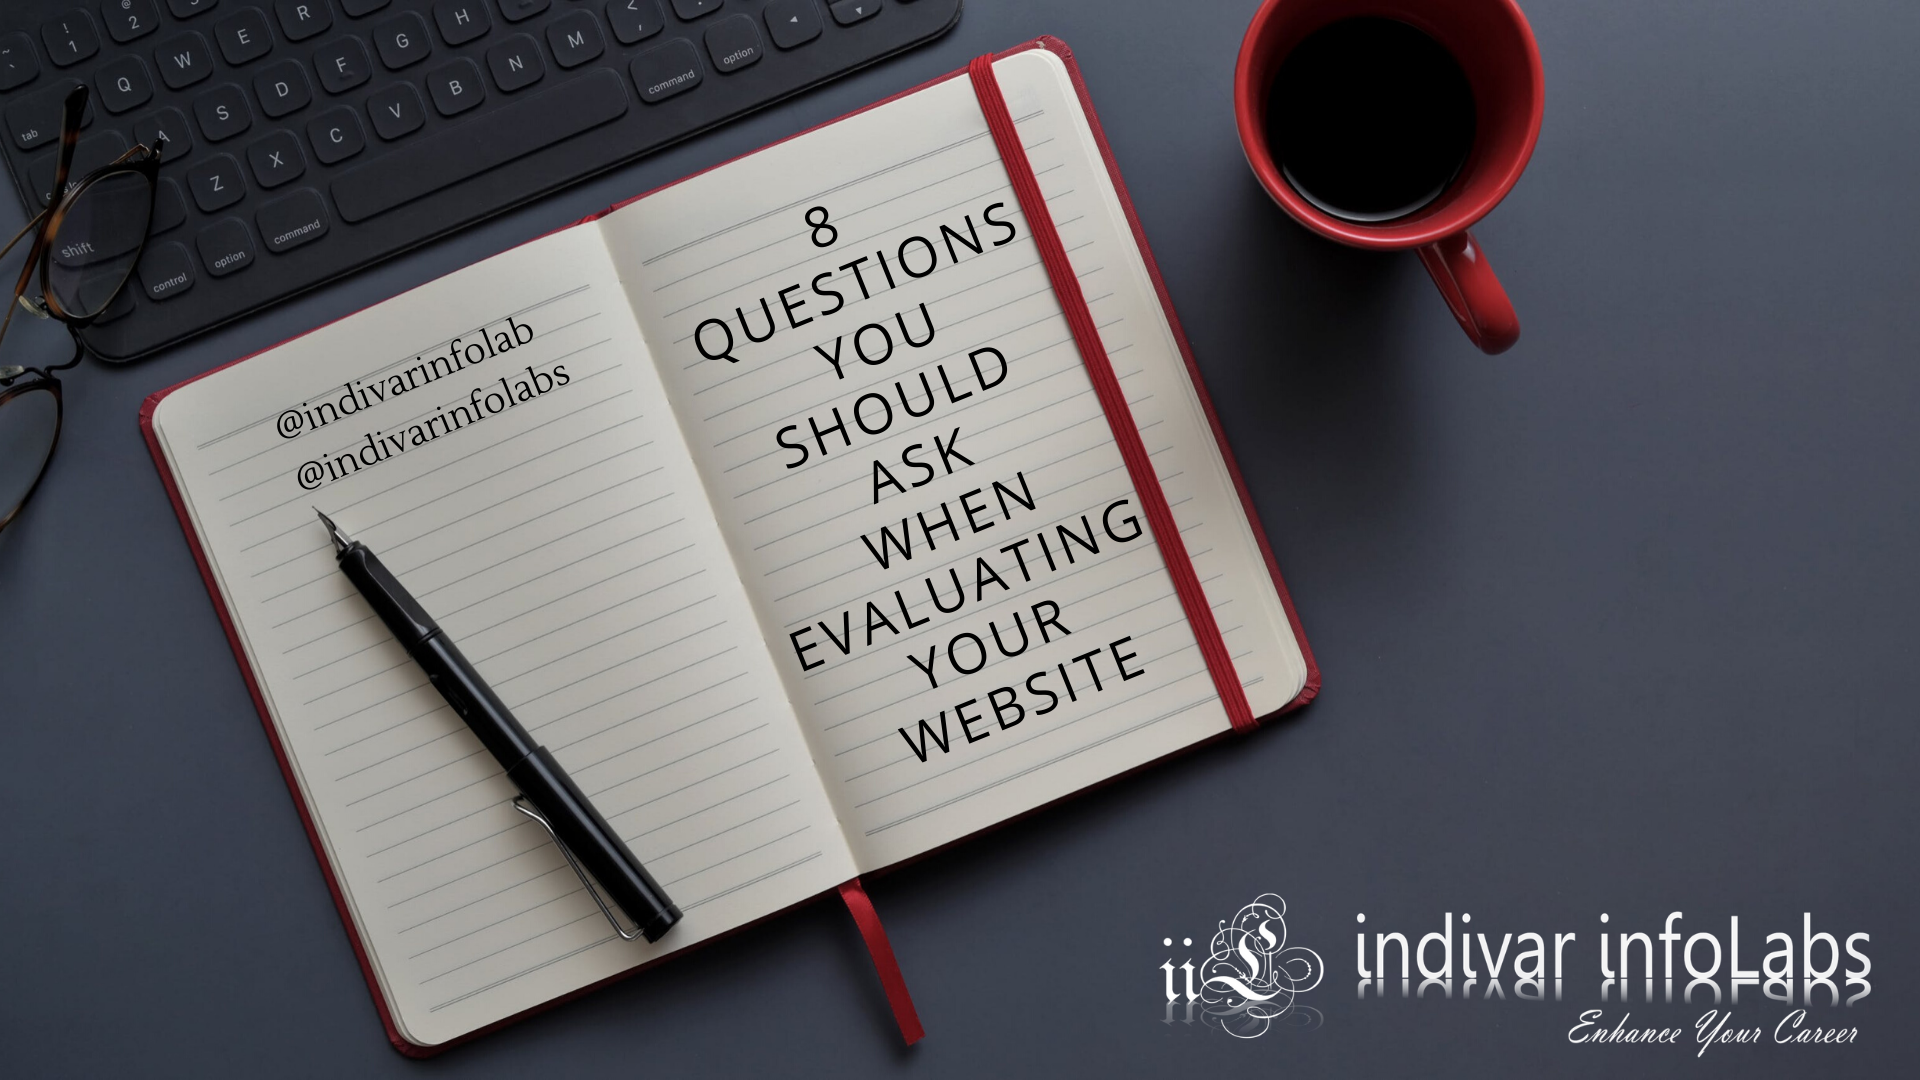 8 Questions You Should Ask When Evaluating Your Website?